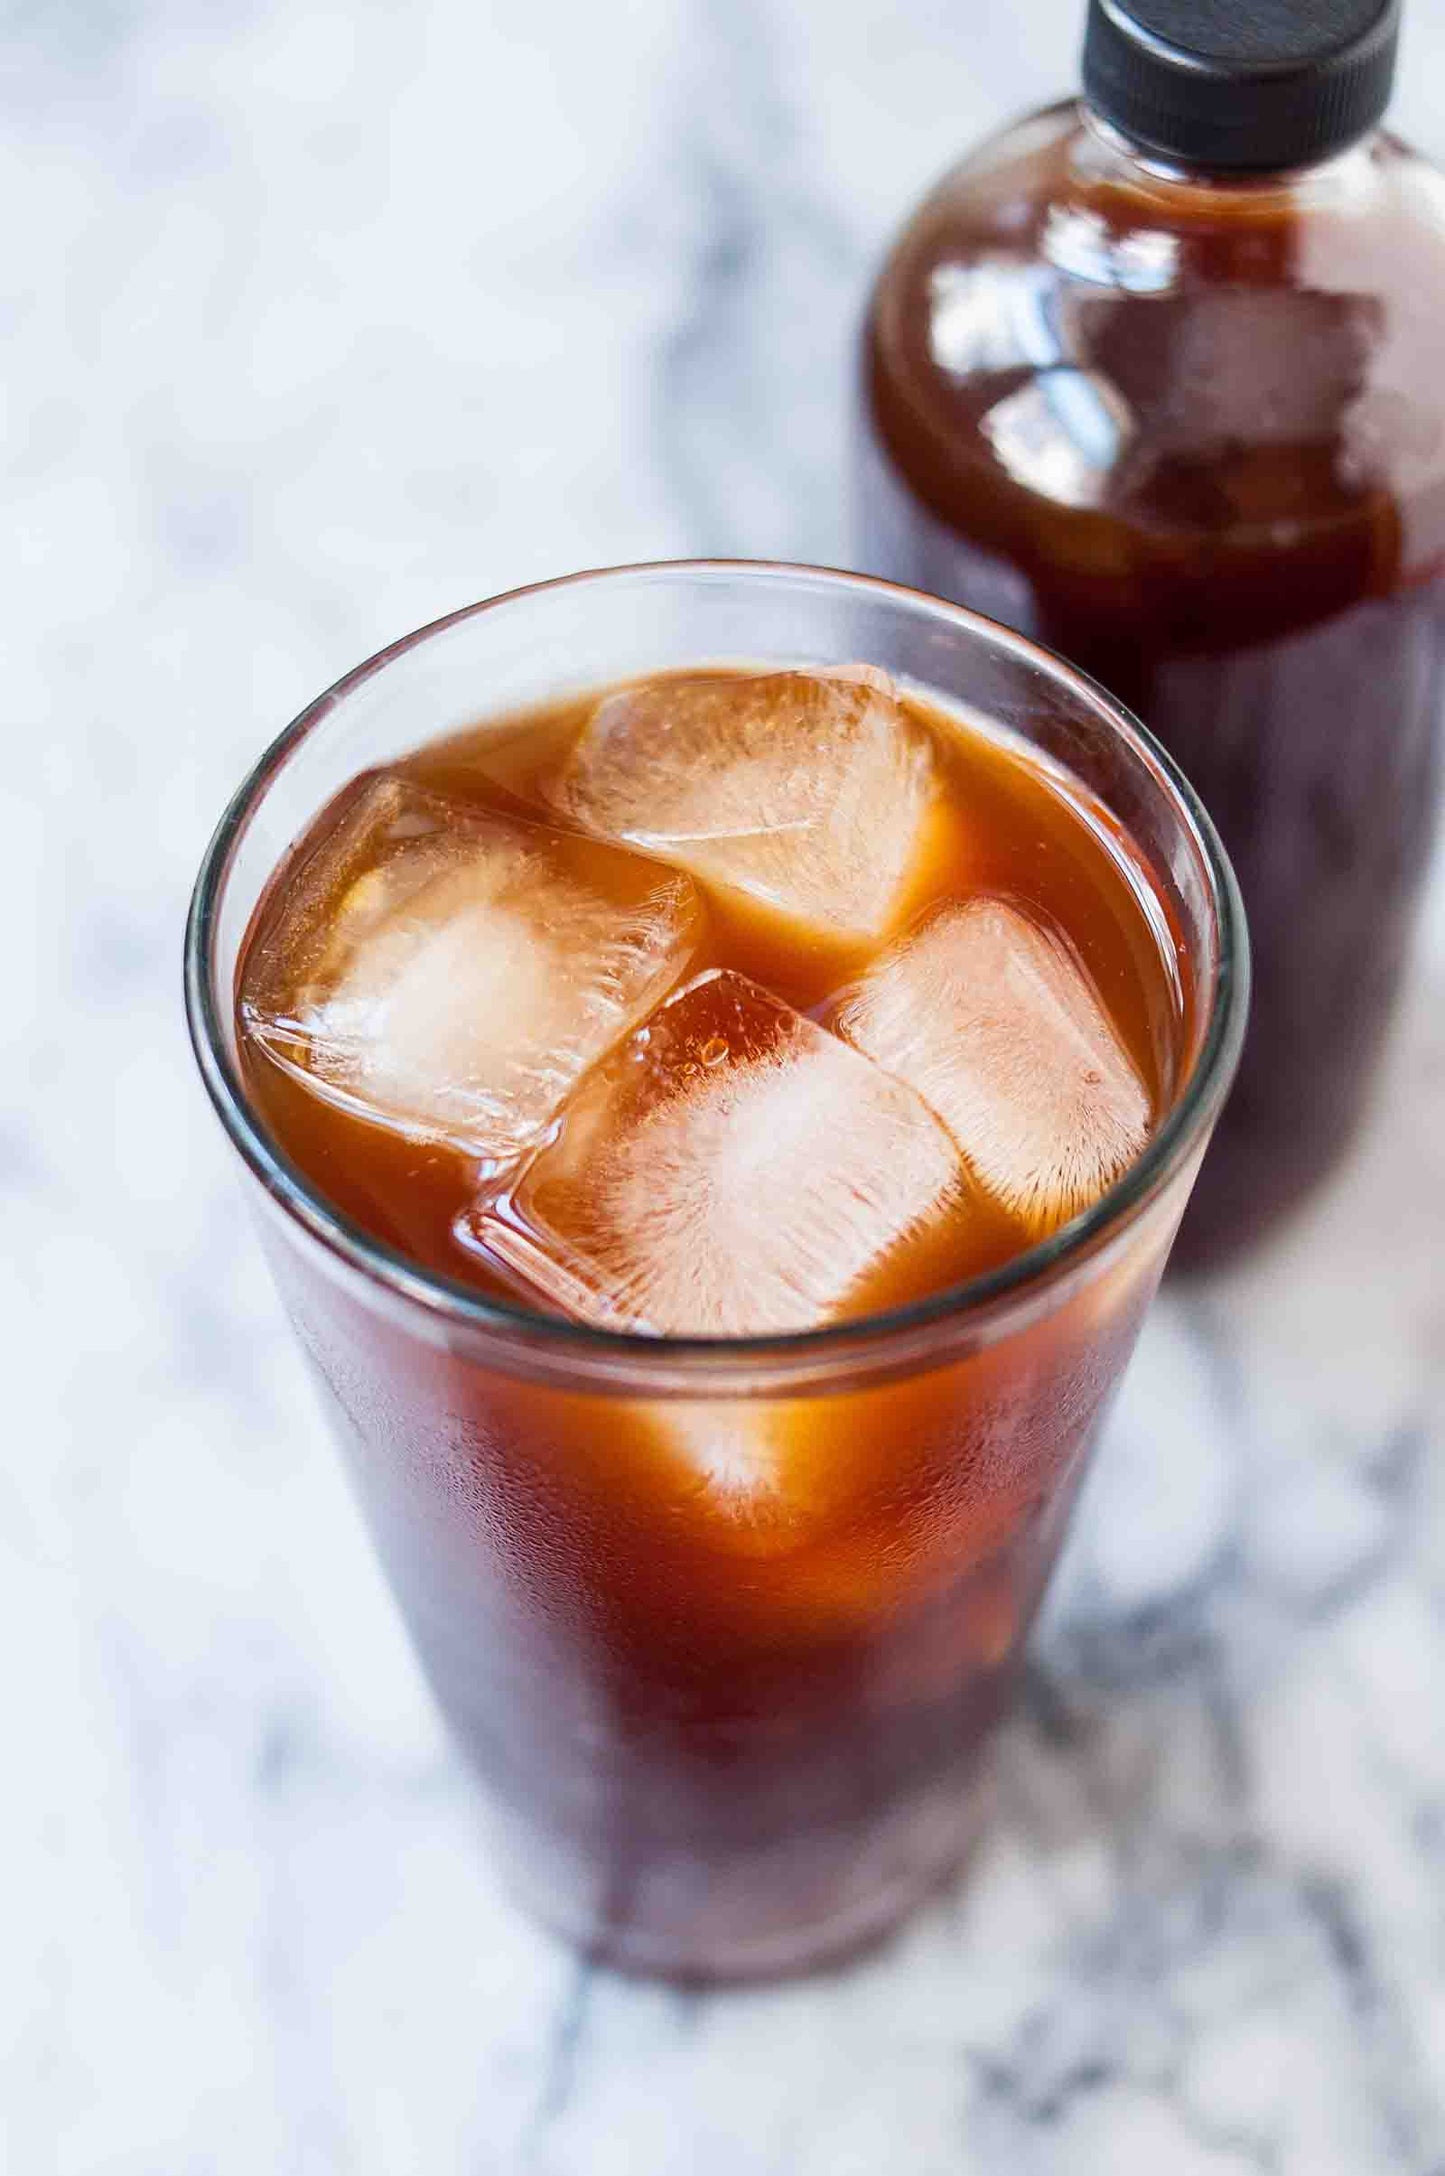 Peachy Sweet Summer! Our Cold Brew Recipe